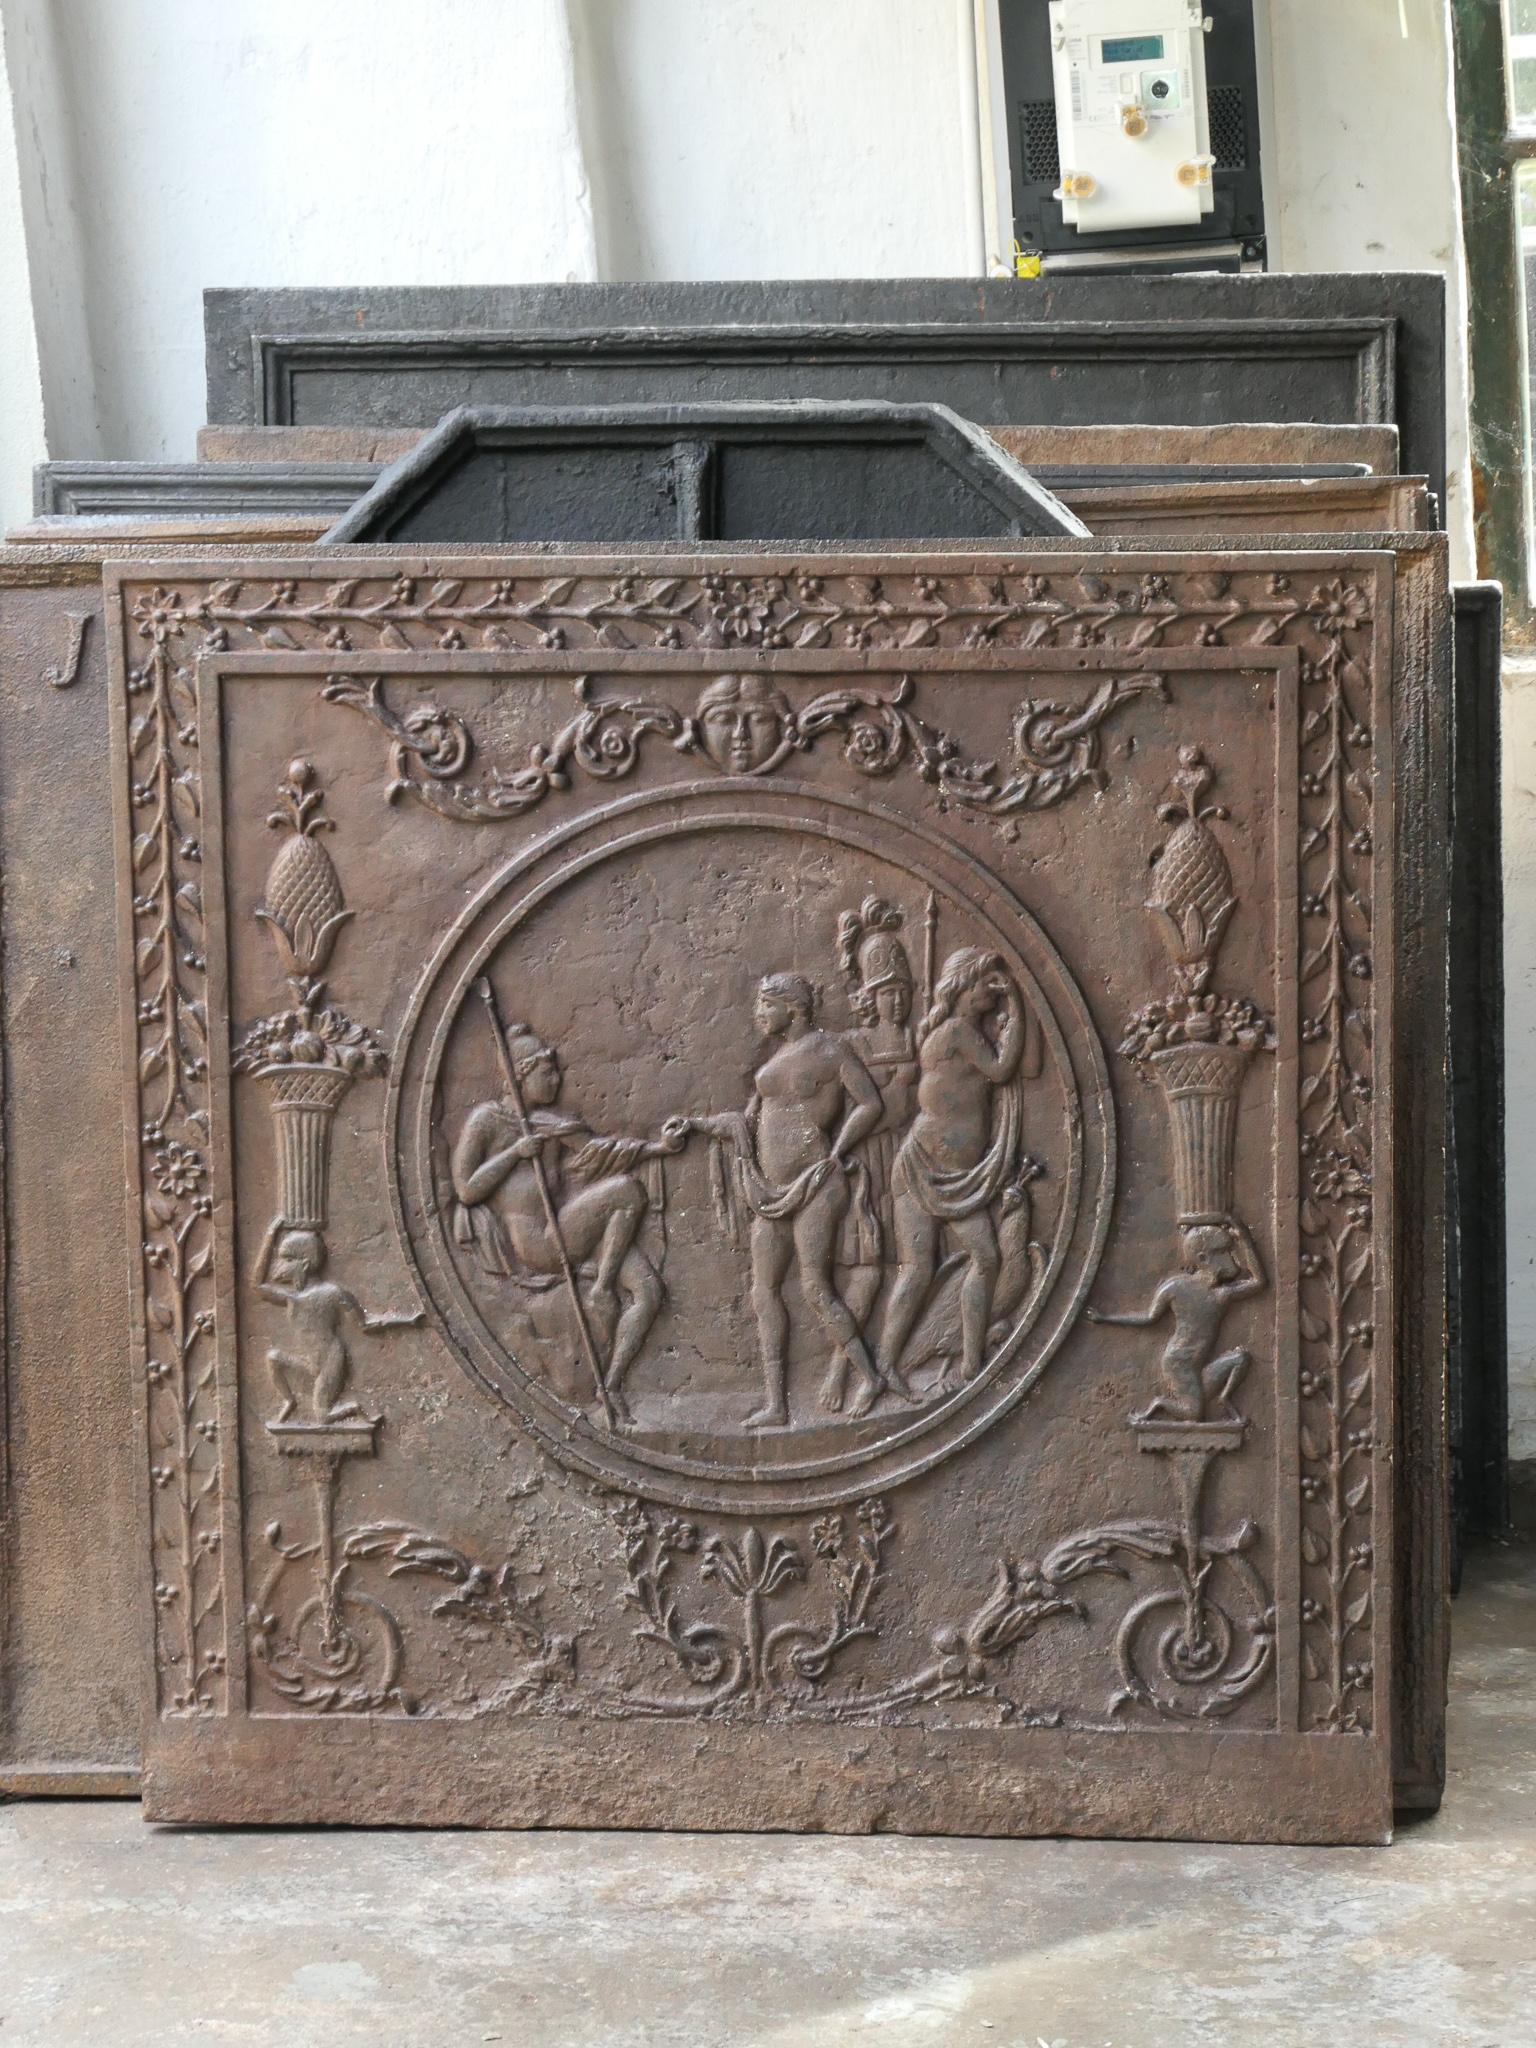 Late 18th or early 19th century French fireback with the Judgement of Paris. Neoclassical period. The fireback is made of cast iron and has a natural brown patina. Upon request it can be made black / pewter. The condition is good, no cracks.

This